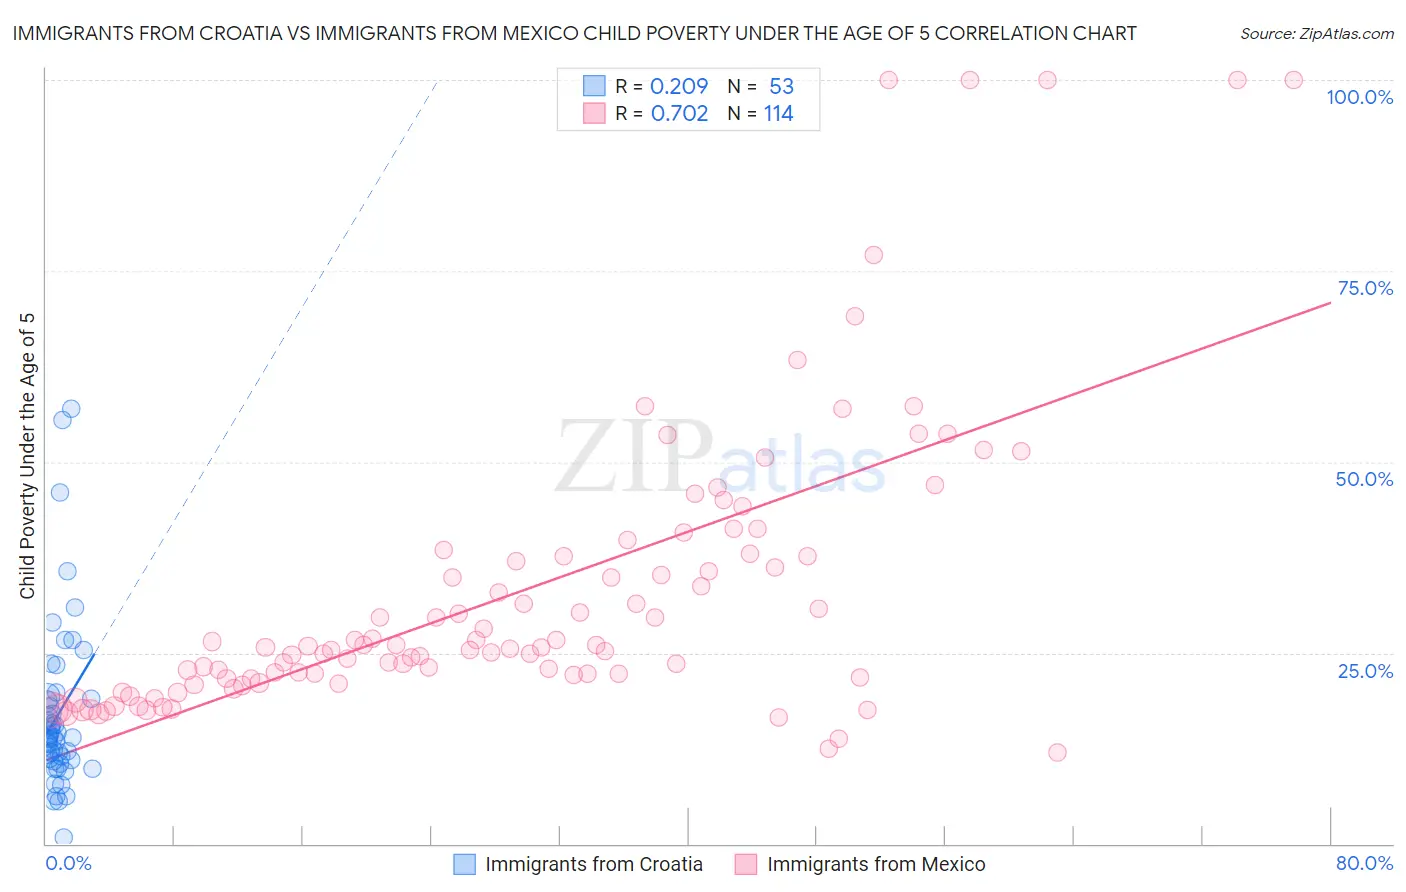 Immigrants from Croatia vs Immigrants from Mexico Child Poverty Under the Age of 5